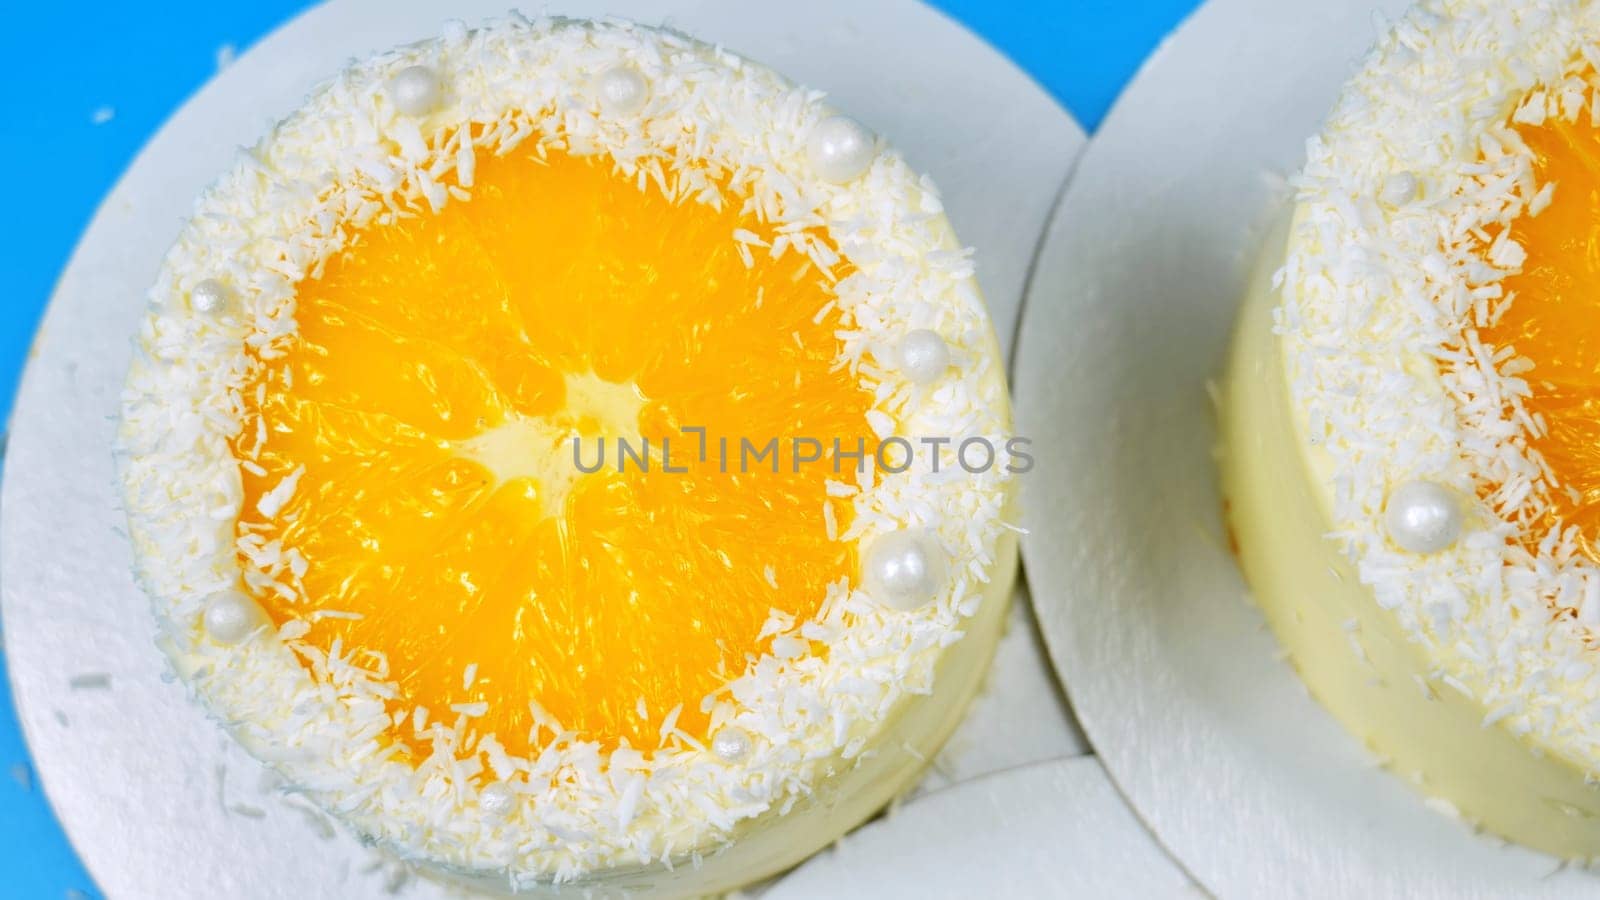 Small cakes with orange and coconut on a blue background. by DovidPro